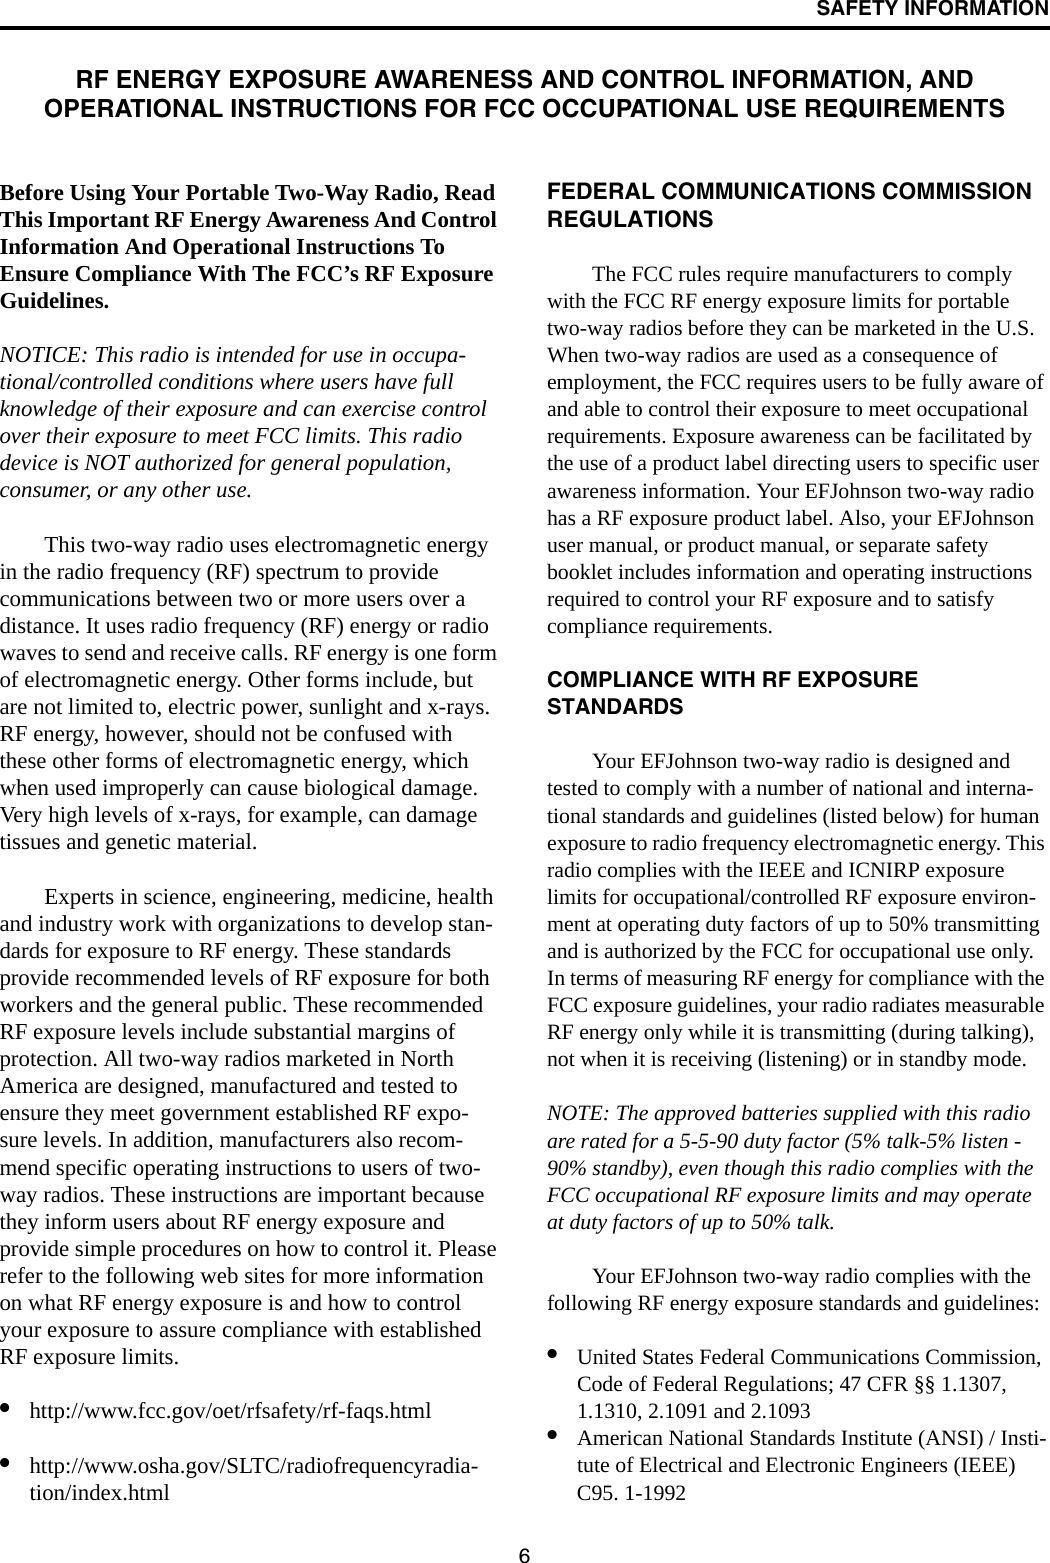 6SAFETY INFORMATIONRF ENERGY EXPOSURE AWARENESS AND CONTROL INFORMATION, ANDOPERATIONAL INSTRUCTIONS FOR FCC OCCUPATIONAL USE REQUIREMENTSBefore Using Your Portable Two-Way Radio, Read This Important RF Energy Awareness And Control Information And Operational Instructions To Ensure Compliance With The FCC’s RF Exposure Guidelines.NOTICE: This radio is intended for use in occupa-tional/controlled conditions where users have full knowledge of their exposure and can exercise control over their exposure to meet FCC limits. This radio device is NOT authorized for general population, consumer, or any other use.This two-way radio uses electromagnetic energy in the radio frequency (RF) spectrum to provide communications between two or more users over a distance. It uses radio frequency (RF) energy or radio waves to send and receive calls. RF energy is one form of electromagnetic energy. Other forms include, but are not limited to, electric power, sunlight and x-rays. RF energy, however, should not be confused with these other forms of electromagnetic energy, which when used improperly can cause biological damage. Very high levels of x-rays, for example, can damage tissues and genetic material. Experts in science, engineering, medicine, health and industry work with organizations to develop stan-dards for exposure to RF energy. These standards provide recommended levels of RF exposure for both workers and the general public. These recommended RF exposure levels include substantial margins of protection. All two-way radios marketed in North America are designed, manufactured and tested to ensure they meet government established RF expo-sure levels. In addition, manufacturers also recom-mend specific operating instructions to users of two-way radios. These instructions are important because they inform users about RF energy exposure and provide simple procedures on how to control it. Please refer to the following web sites for more information on what RF energy exposure is and how to control your exposure to assure compliance with established RF exposure limits. •http://www.fcc.gov/oet/rfsafety/rf-faqs.html•http://www.osha.gov/SLTC/radiofrequencyradia-tion/index.html FEDERAL COMMUNICATIONS COMMISSION REGULATIONSThe FCC rules require manufacturers to comply with the FCC RF energy exposure limits for portable two-way radios before they can be marketed in the U.S. When two-way radios are used as a consequence of employment, the FCC requires users to be fully aware of and able to control their exposure to meet occupational requirements. Exposure awareness can be facilitated by the use of a product label directing users to specific user awareness information. Your EFJohnson two-way radio has a RF exposure product label. Also, your EFJohnson user manual, or product manual, or separate safety booklet includes information and operating instructions required to control your RF exposure and to satisfy compliance requirements. COMPLIANCE WITH RF EXPOSURE STANDARDSYour EFJohnson two-way radio is designed and tested to comply with a number of national and interna-tional standards and guidelines (listed below) for human exposure to radio frequency electromagnetic energy. This radio complies with the IEEE and ICNIRP exposure limits for occupational/controlled RF exposure environ-ment at operating duty factors of up to 50% transmitting and is authorized by the FCC for occupational use only. In terms of measuring RF energy for compliance with the FCC exposure guidelines, your radio radiates measurable RF energy only while it is transmitting (during talking), not when it is receiving (listening) or in standby mode. NOTE: The approved batteries supplied with this radio are rated for a 5-5-90 duty factor (5% talk-5% listen - 90% standby), even though this radio complies with the FCC occupational RF exposure limits and may operate at duty factors of up to 50% talk. Your EFJohnson two-way radio complies with the following RF energy exposure standards and guidelines:•United States Federal Communications Commission, Code of Federal Regulations; 47 CFR §§ 1.1307, 1.1310, 2.1091 and 2.1093 •American National Standards Institute (ANSI) / Insti-tute of Electrical and Electronic Engineers (IEEE) C95. 1-1992 